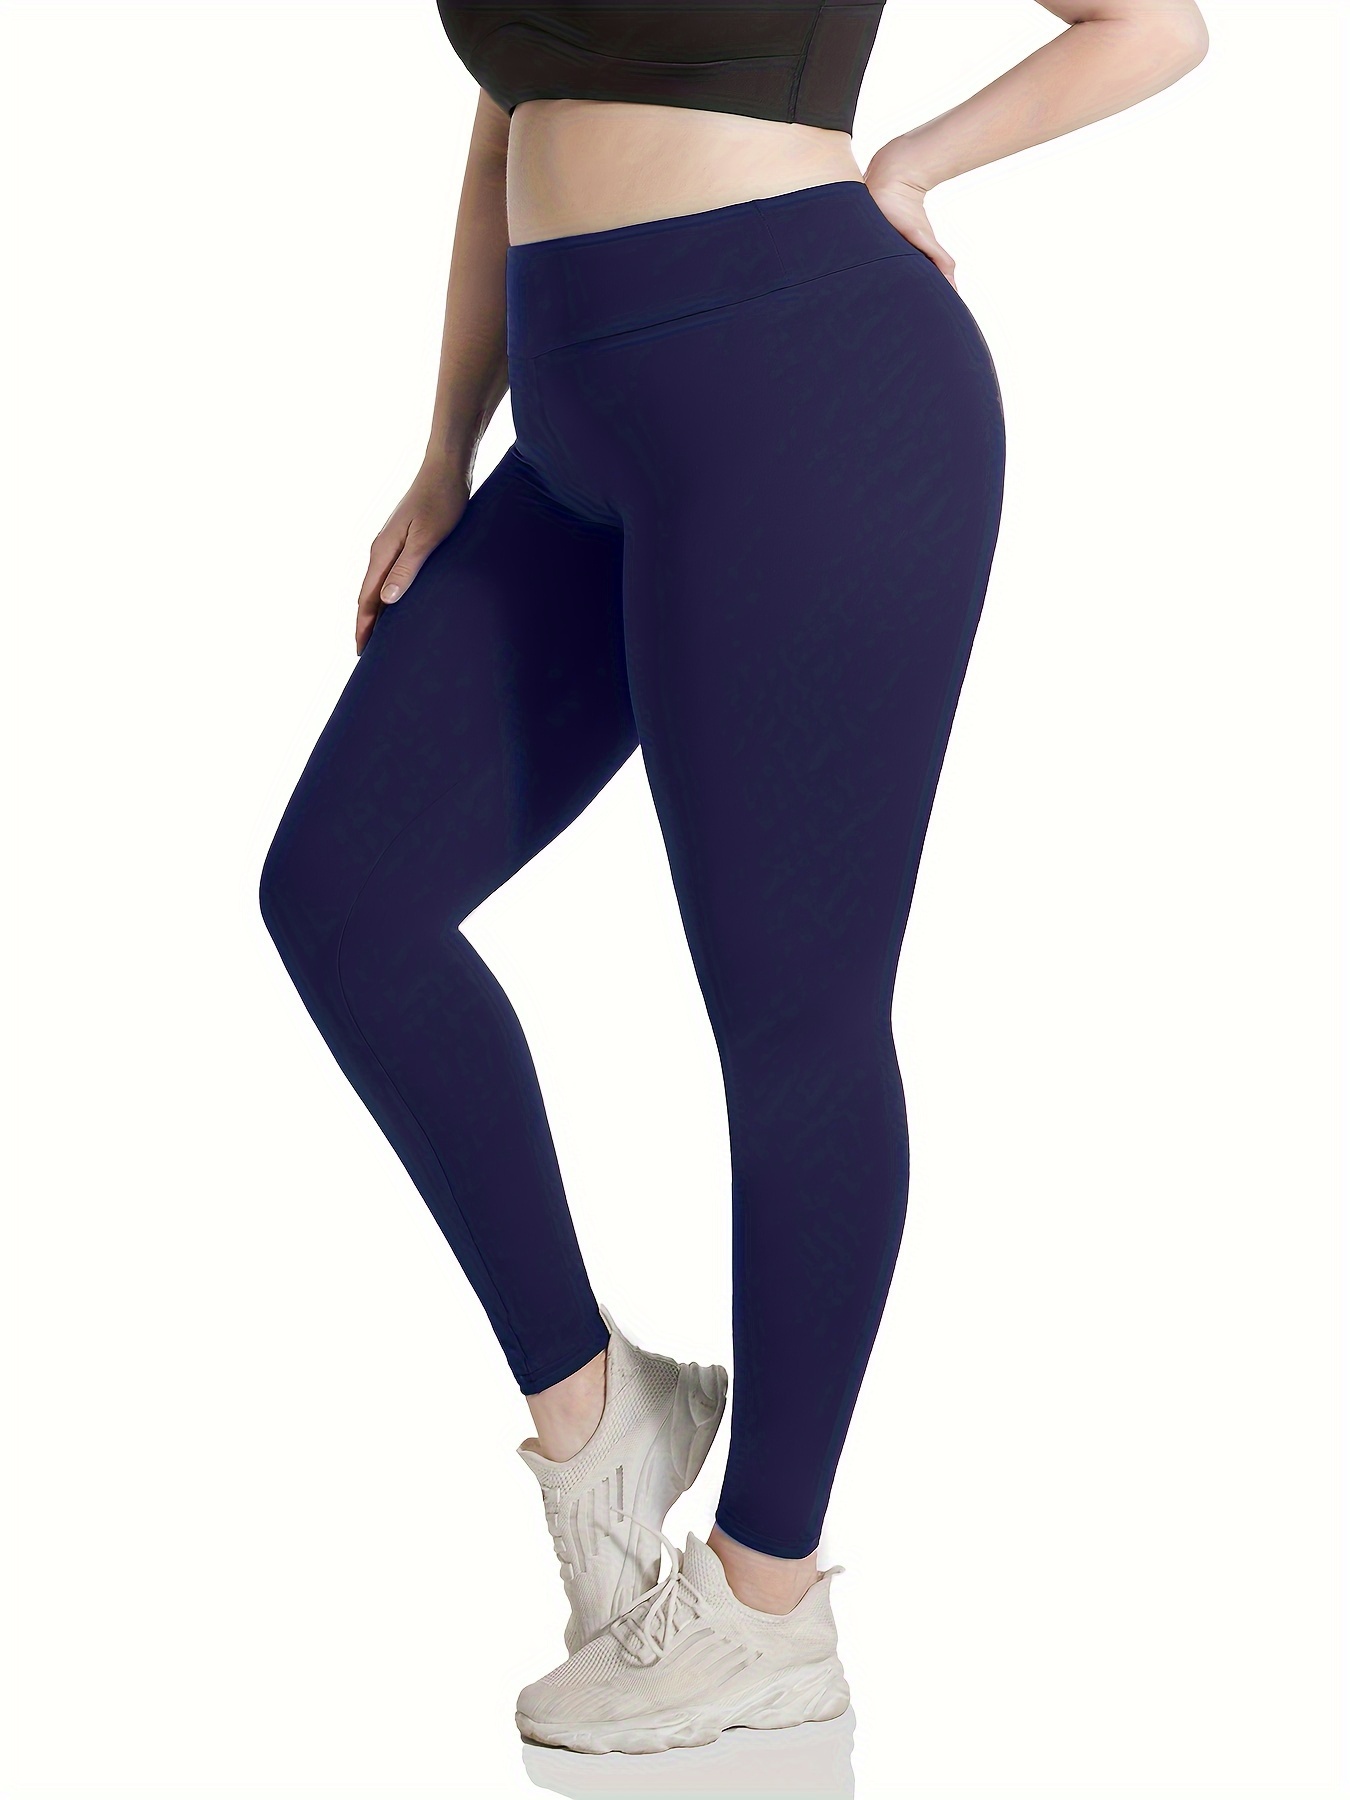 High Waisted Leggings for Women Soft Elastic Plus Size Workout Gym Yoga S-M  L-XL